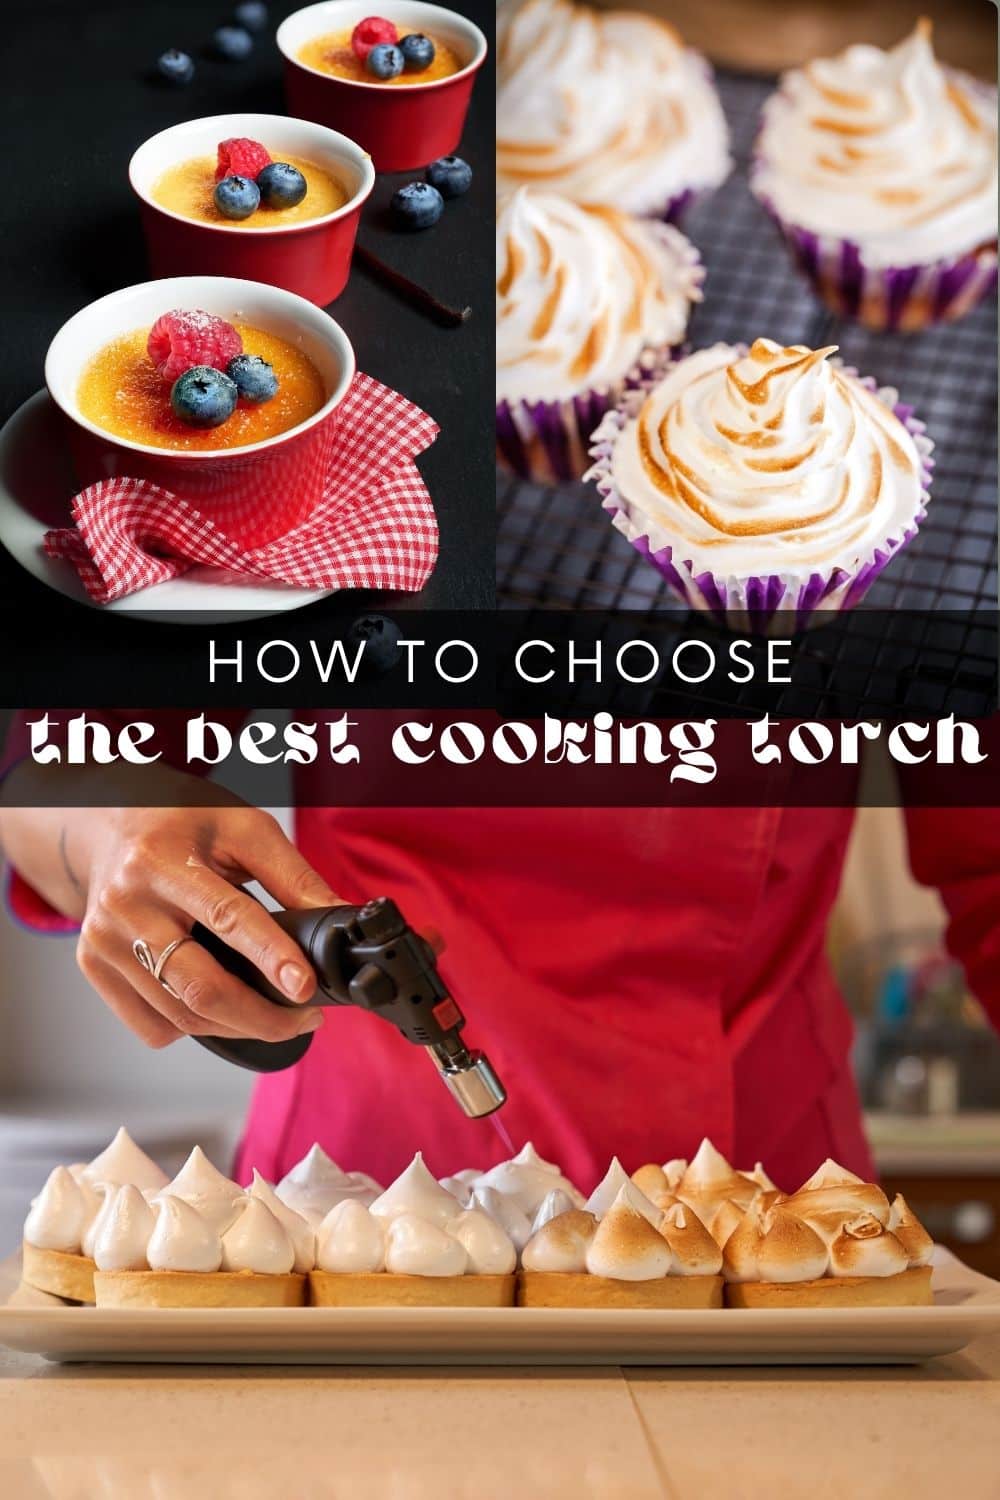 What do crème brûlée, baked Alaska and succulent sous vide steak have in common? They're all delicious foods that can be made even more delectable with the right kitchen torch! Now, don't get intimidated – a cooking torch is not just for professional chefs. It's a versatile tool that any home chef can use to up their cooking game.